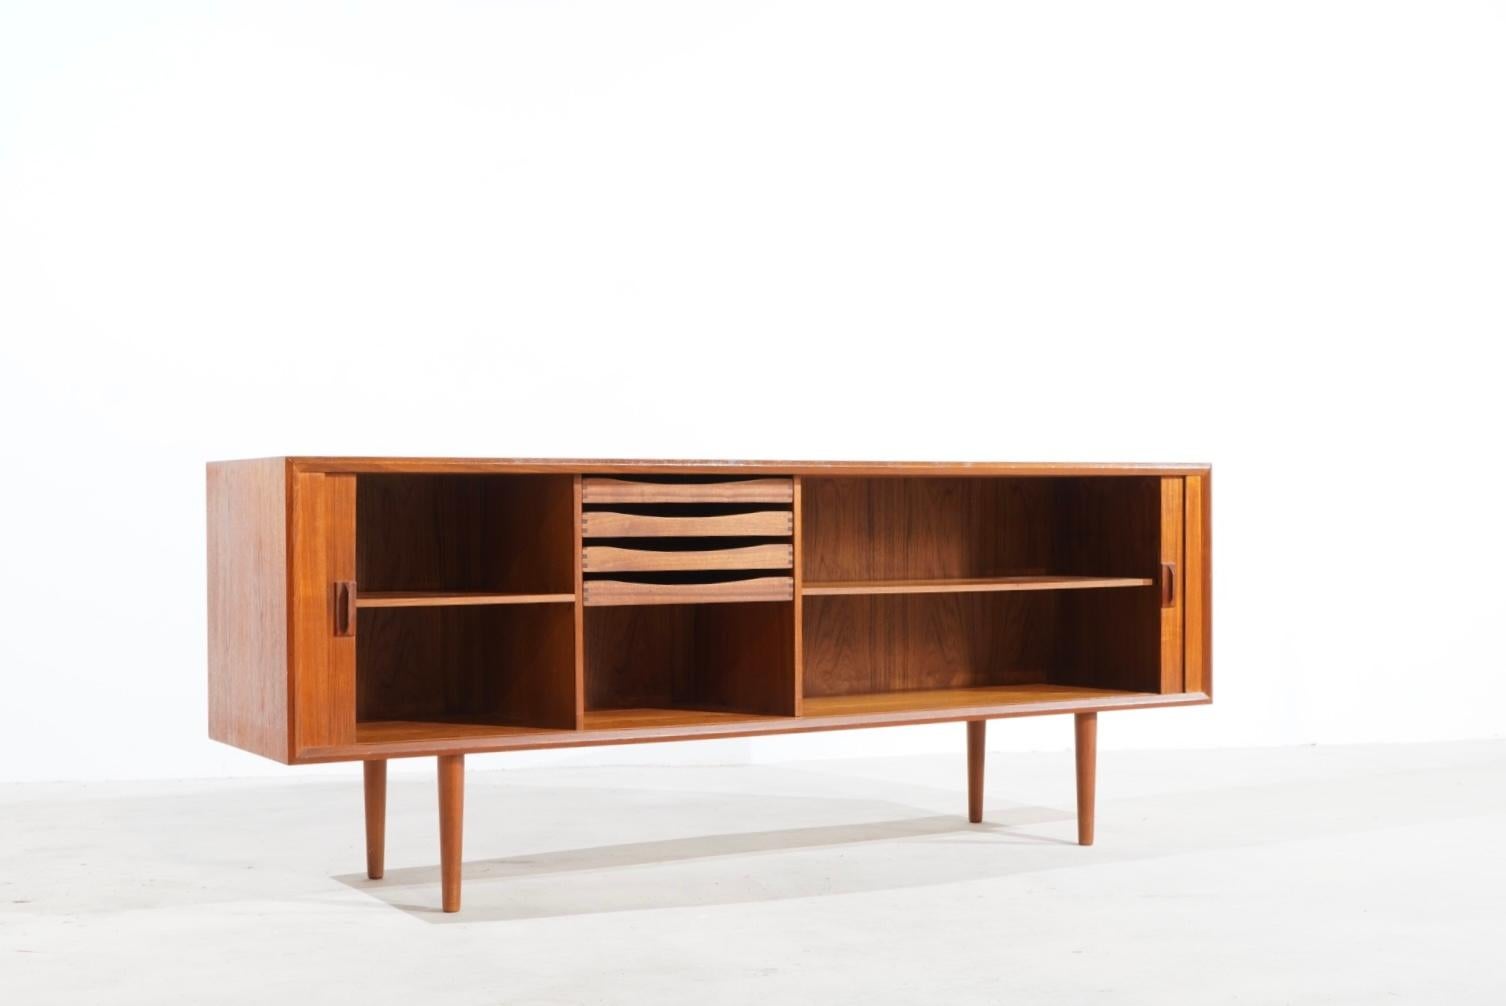 Sideboard designed by Svend Aage larsen Manufactured in Denmark by Faarup furniture factory in the 1960s. The teak sideboard with roller doors impresses with an outstandingly beautiful veneer pattern and clear, elegant design language. 